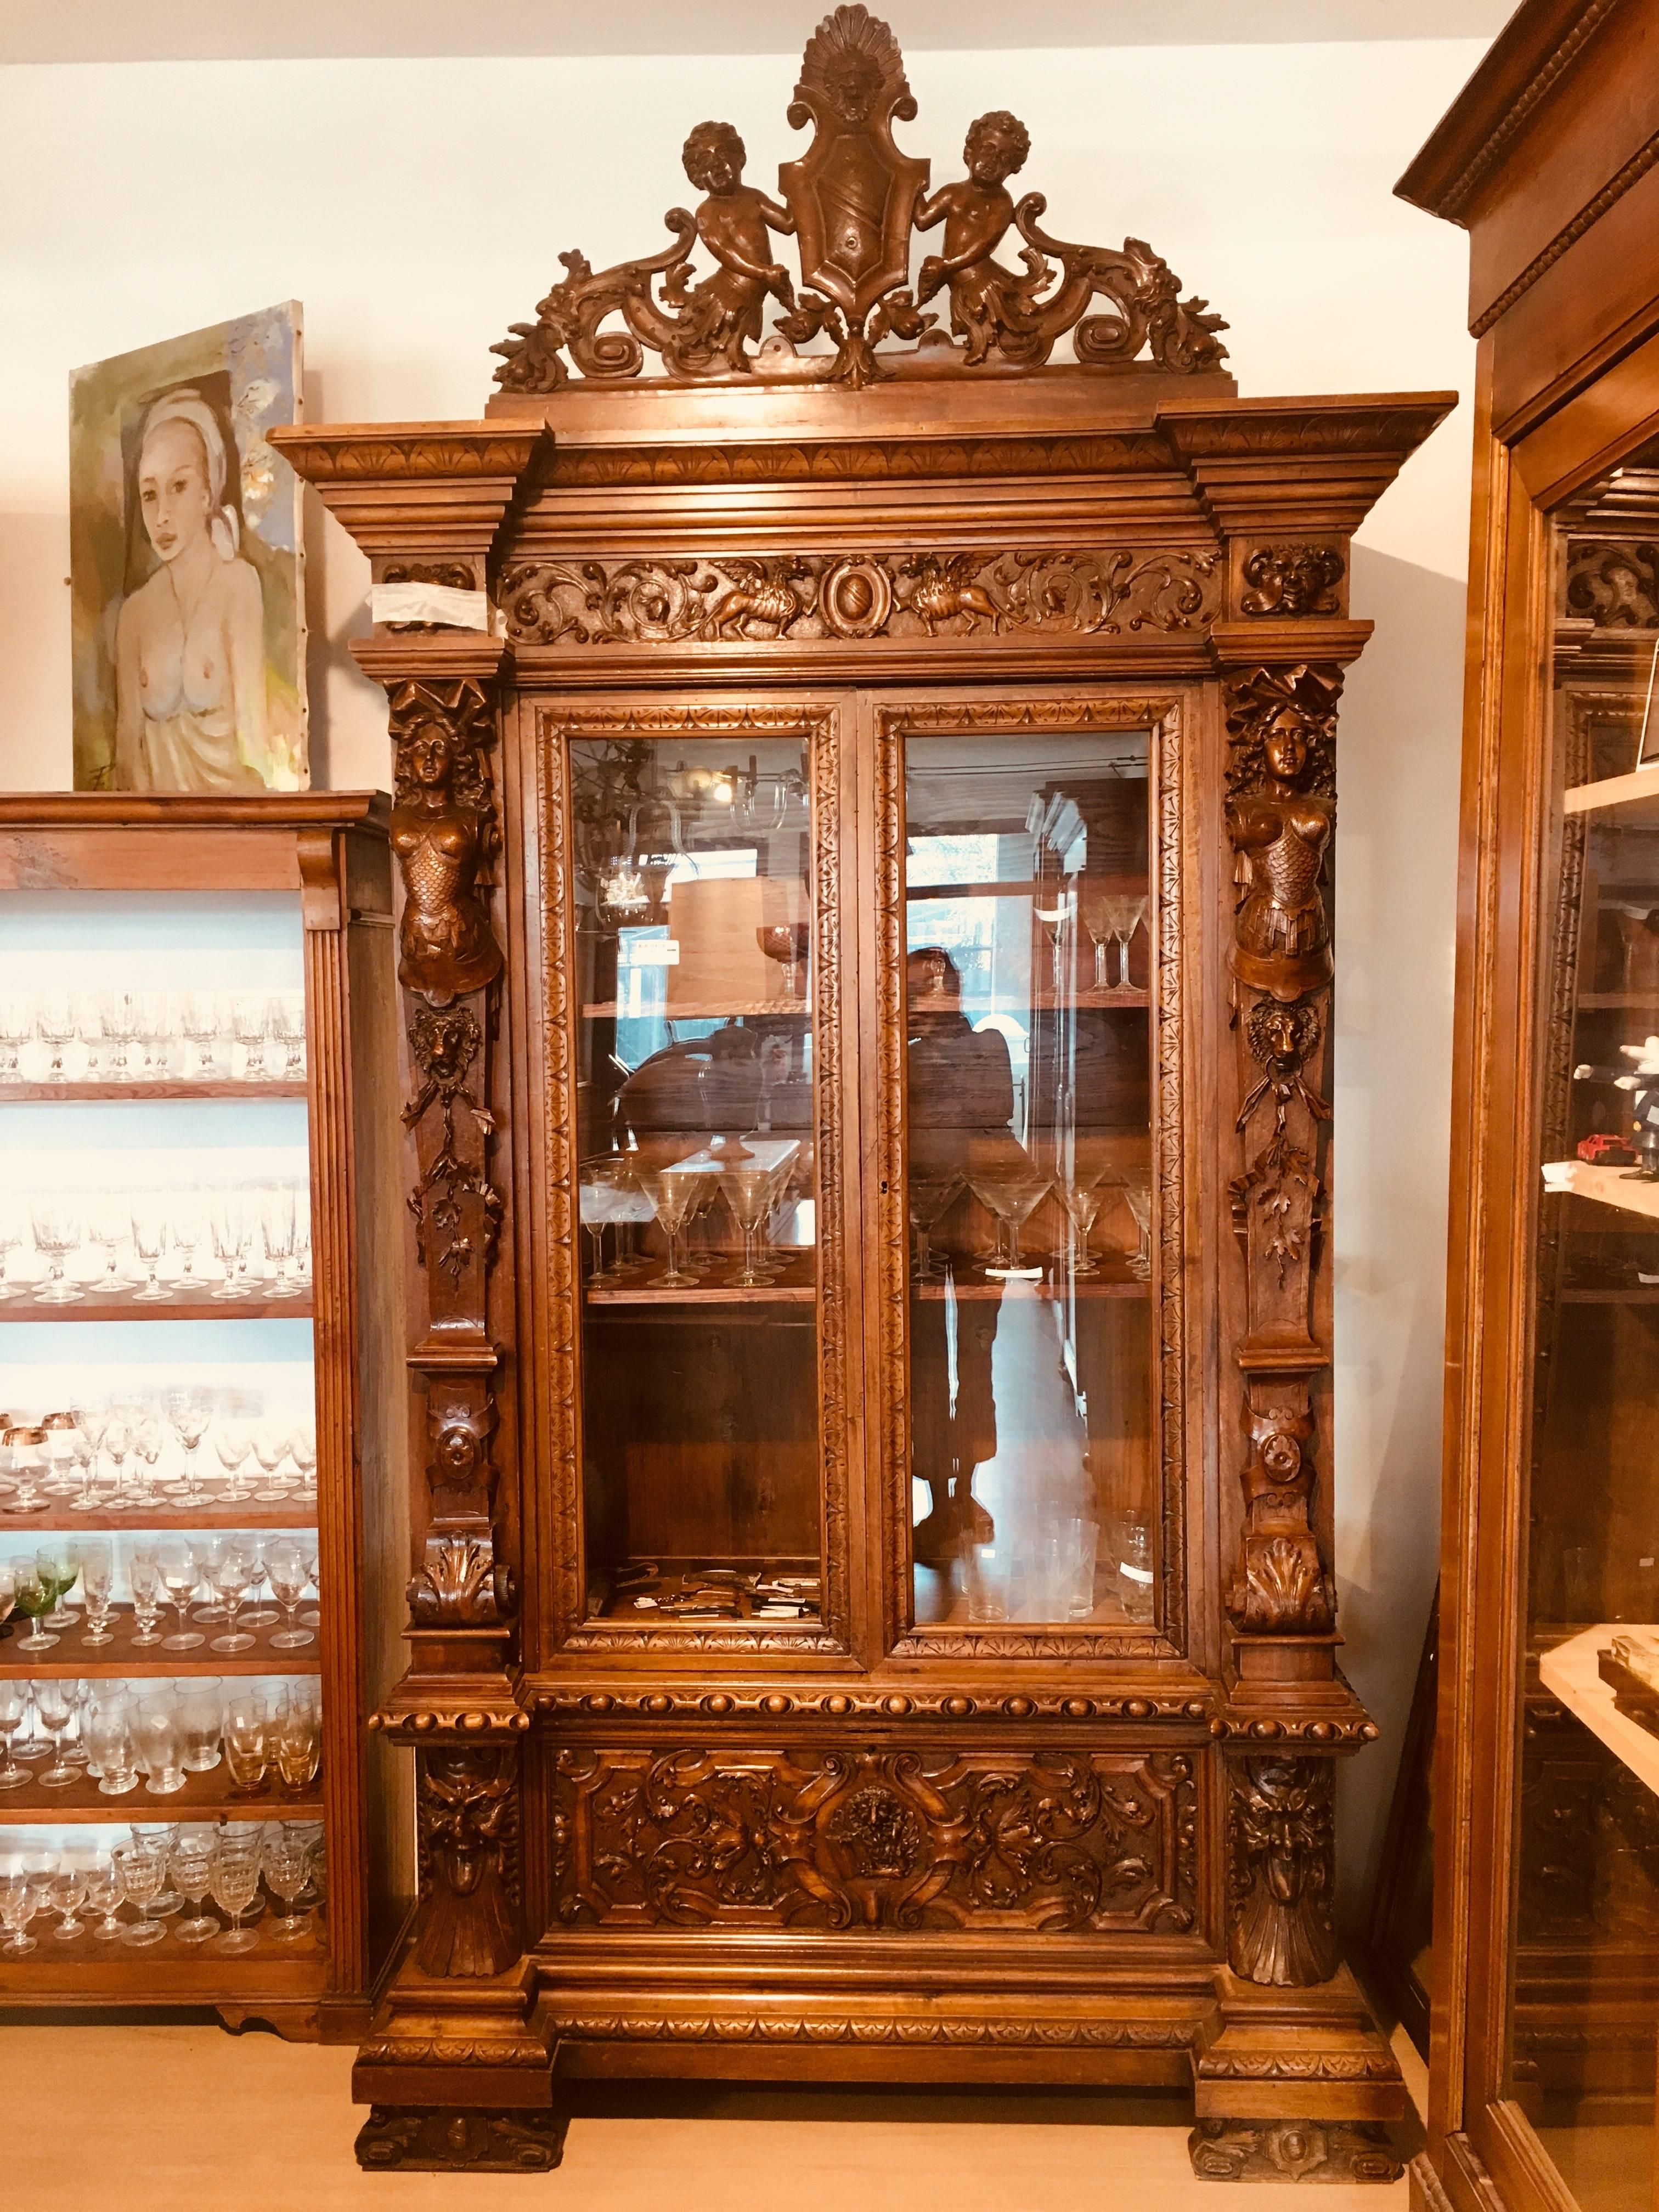 This magnificent and rare 19th century Renaissance grand cabinet with vitrines features intricate decorations heavily carved into the solid walnut wood. There are massive carved wood columns with women's bodies in the centre. This beautiful piece is